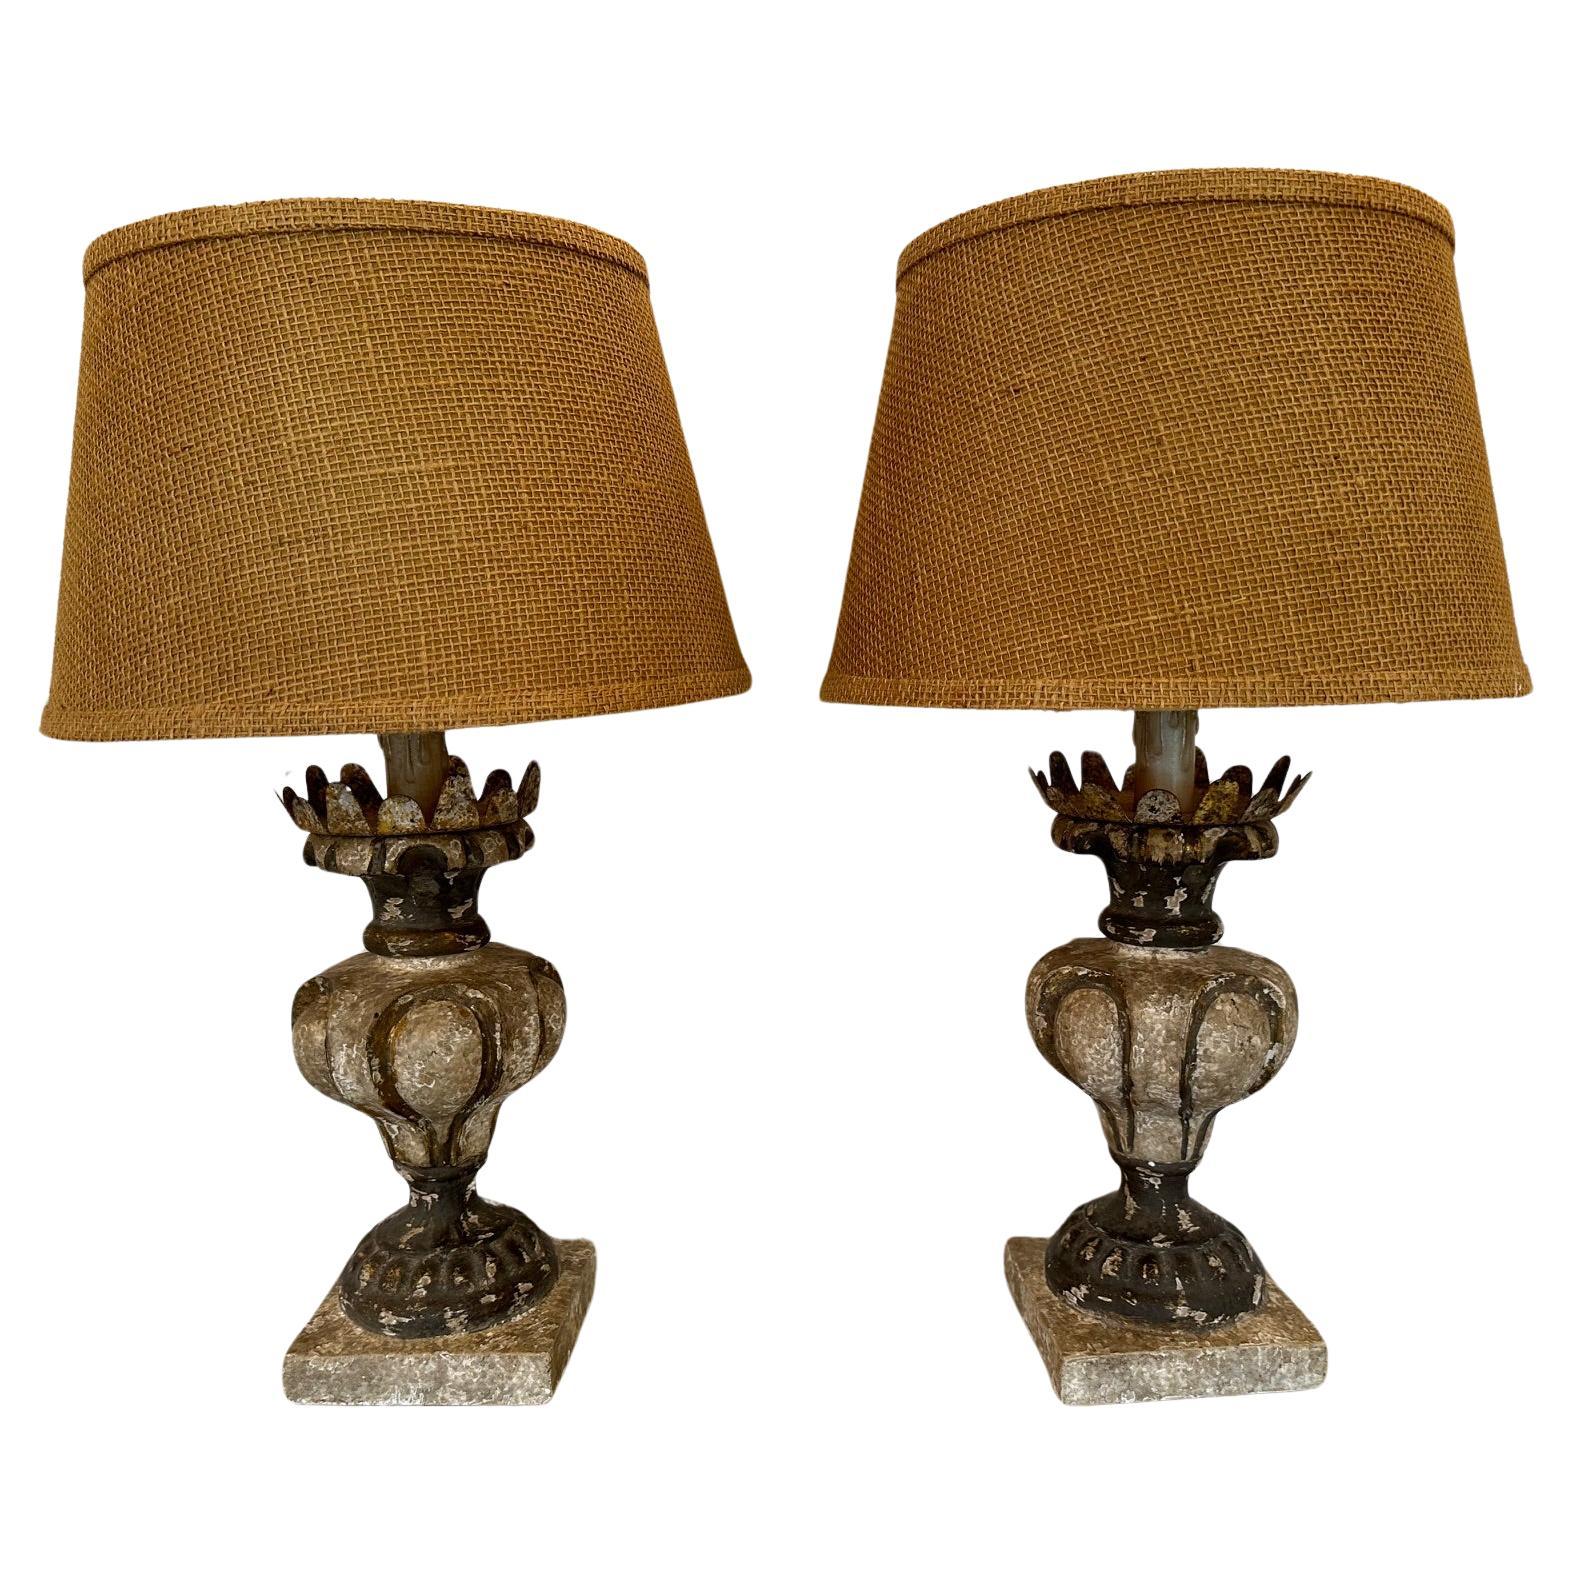 Vintage Pair of Rustic French Carved Wood & Iron Table Lamps For Sale